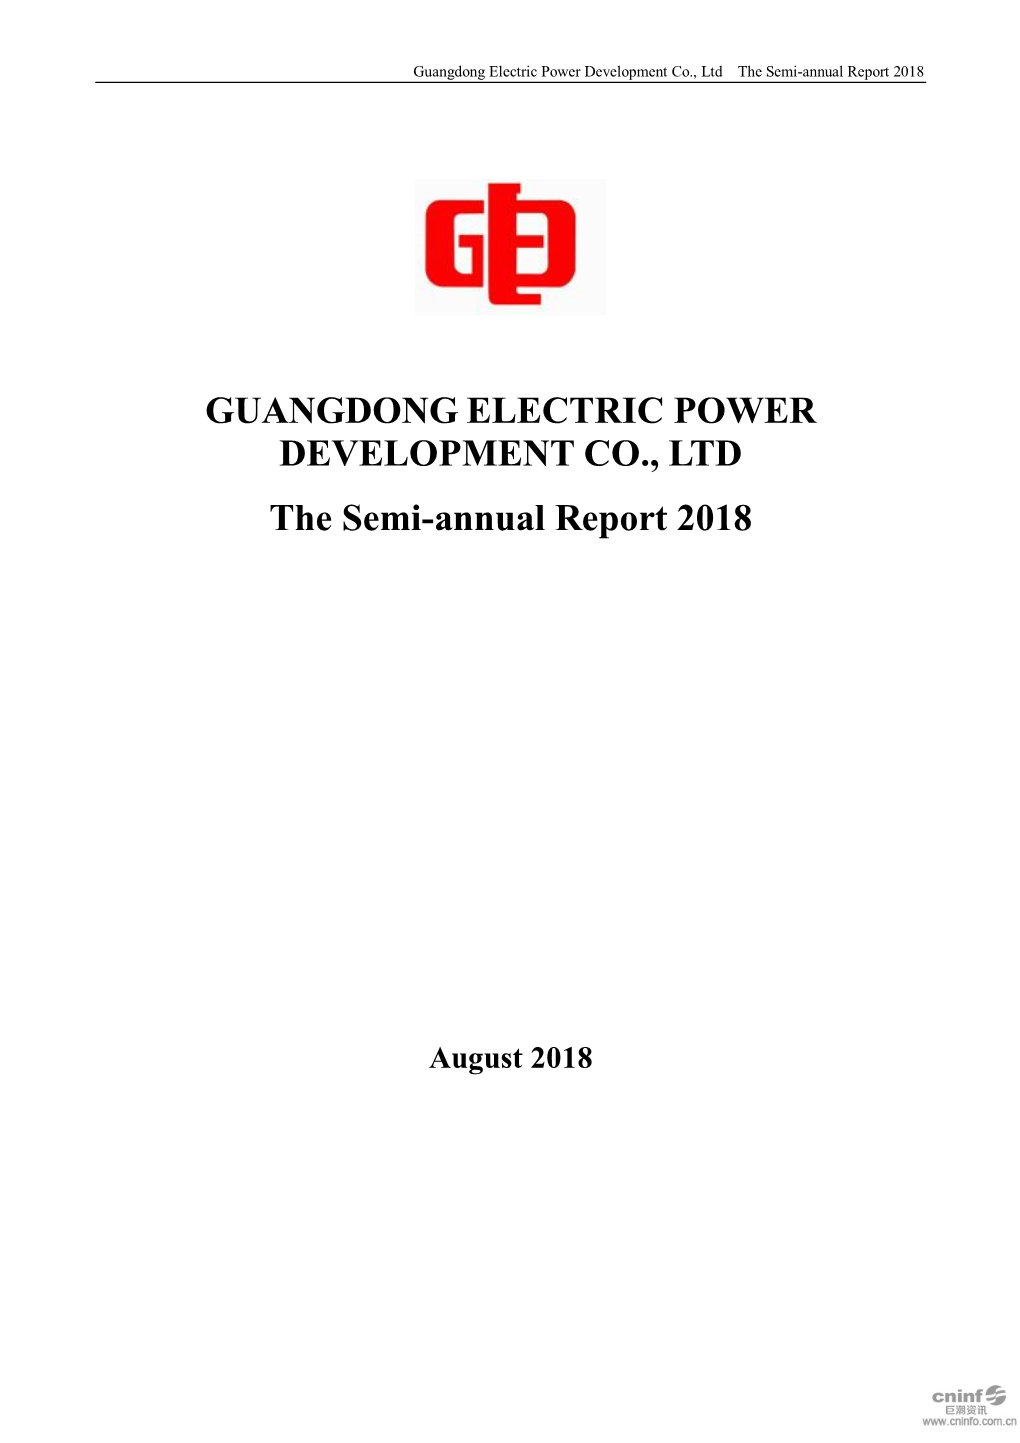 Guangdong Electric Power Development Co., Ltd the Semi-Annual Report 2018